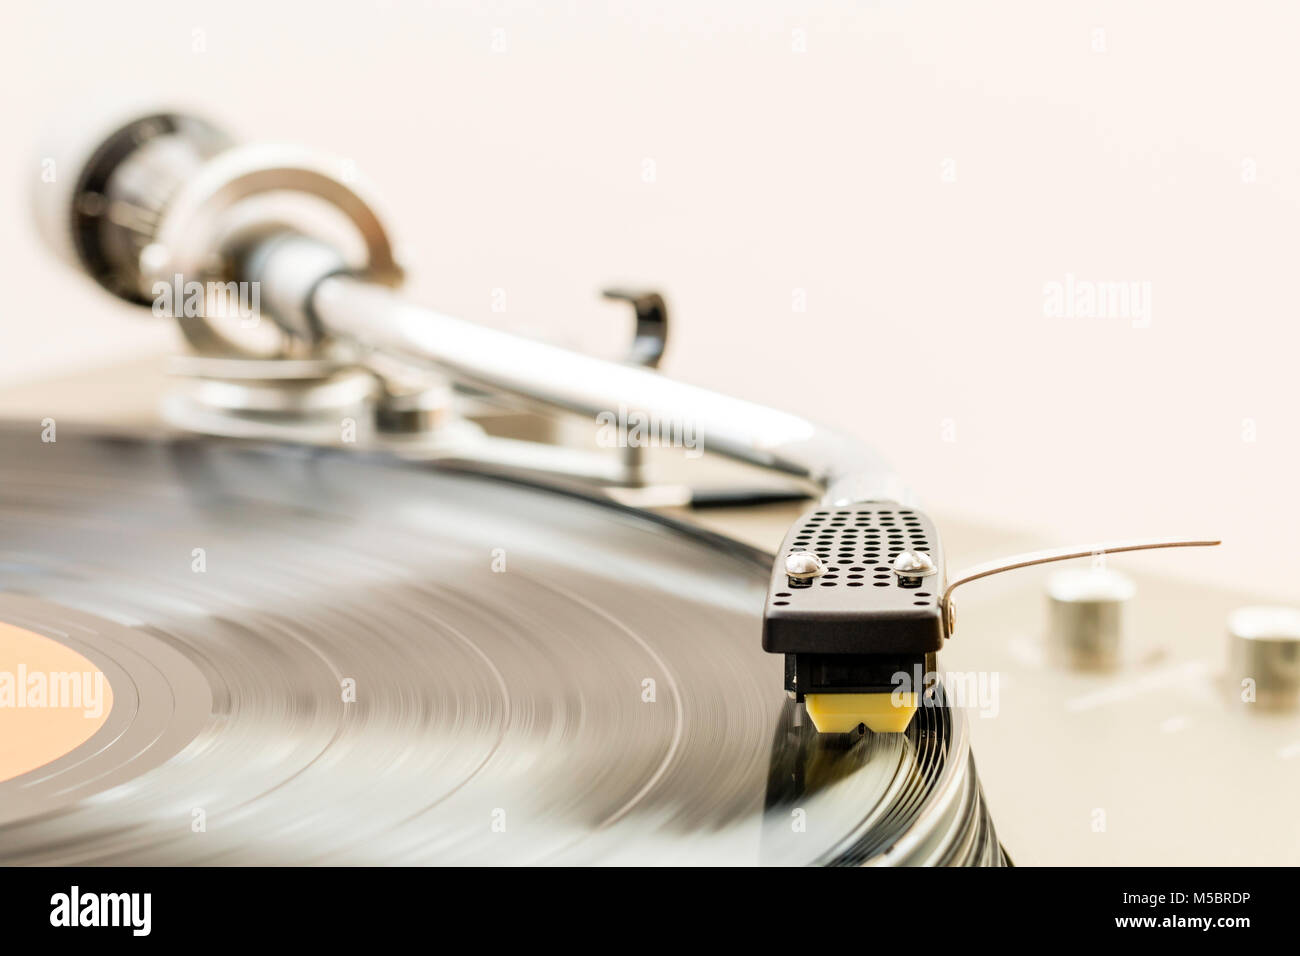 Record player deck, turntable, with 33 rpm, LP, record being played. Tone arm is an S-sharp. Stock Photo